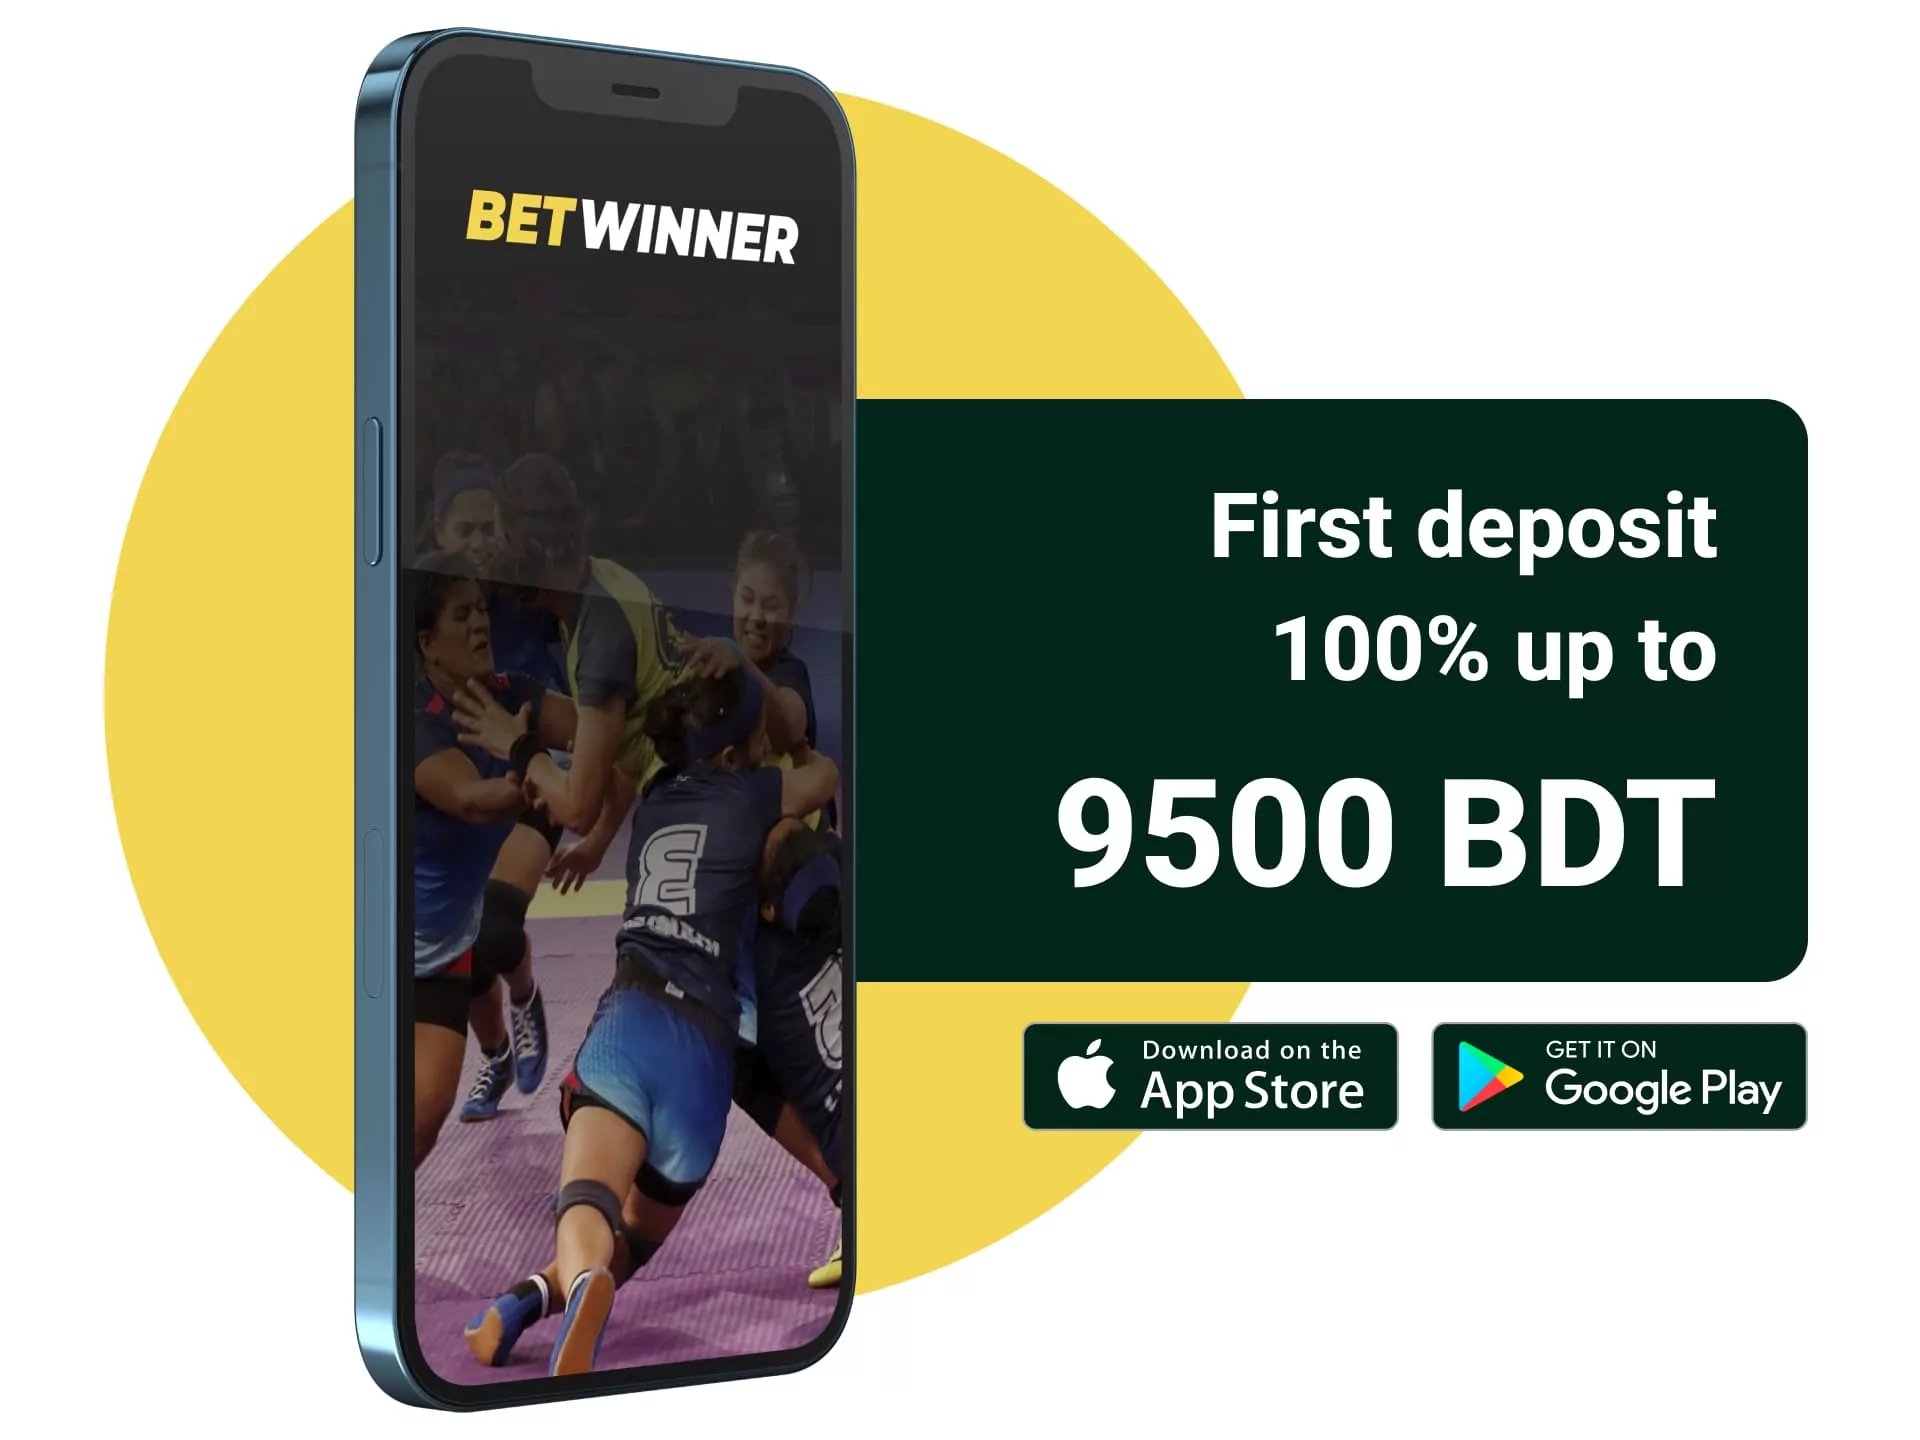 Betwinner accepts bets on kabaddi and gives 100% welcome bonus on first deposit.